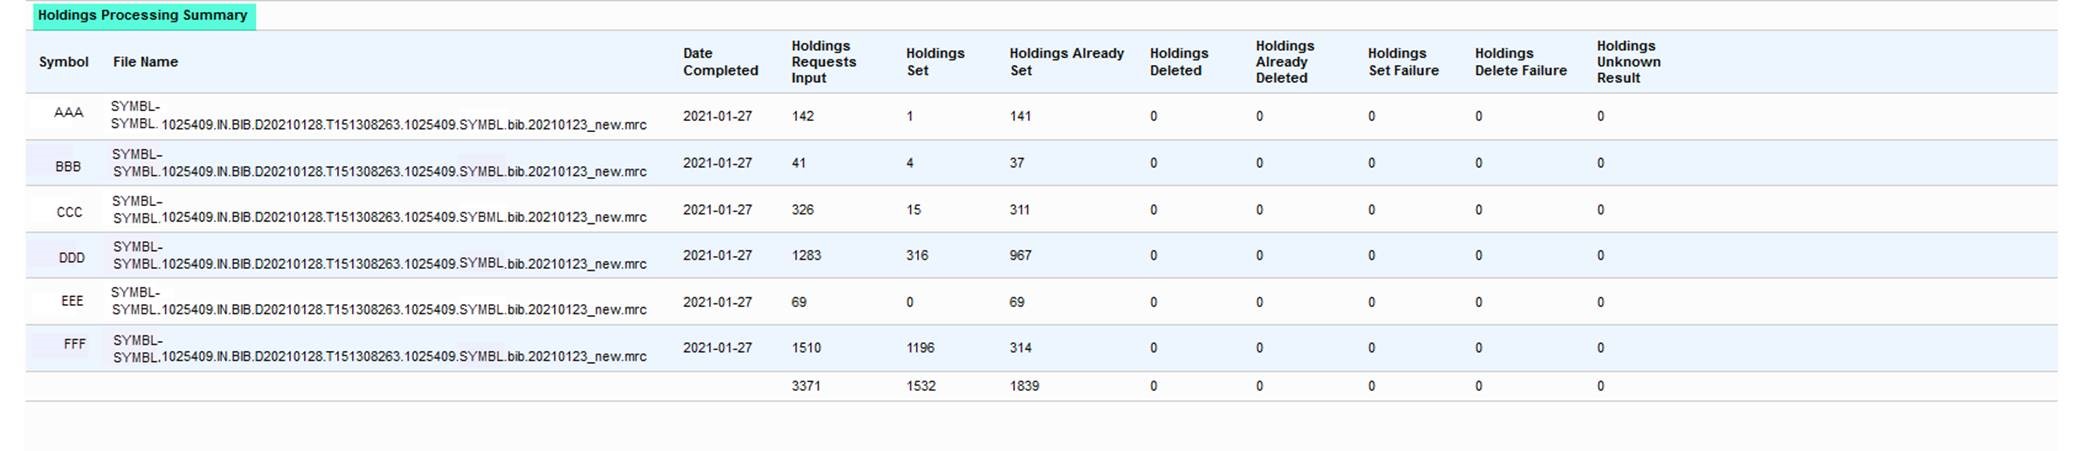 Group Bibliographic and Holdings Processing Summary report - Example